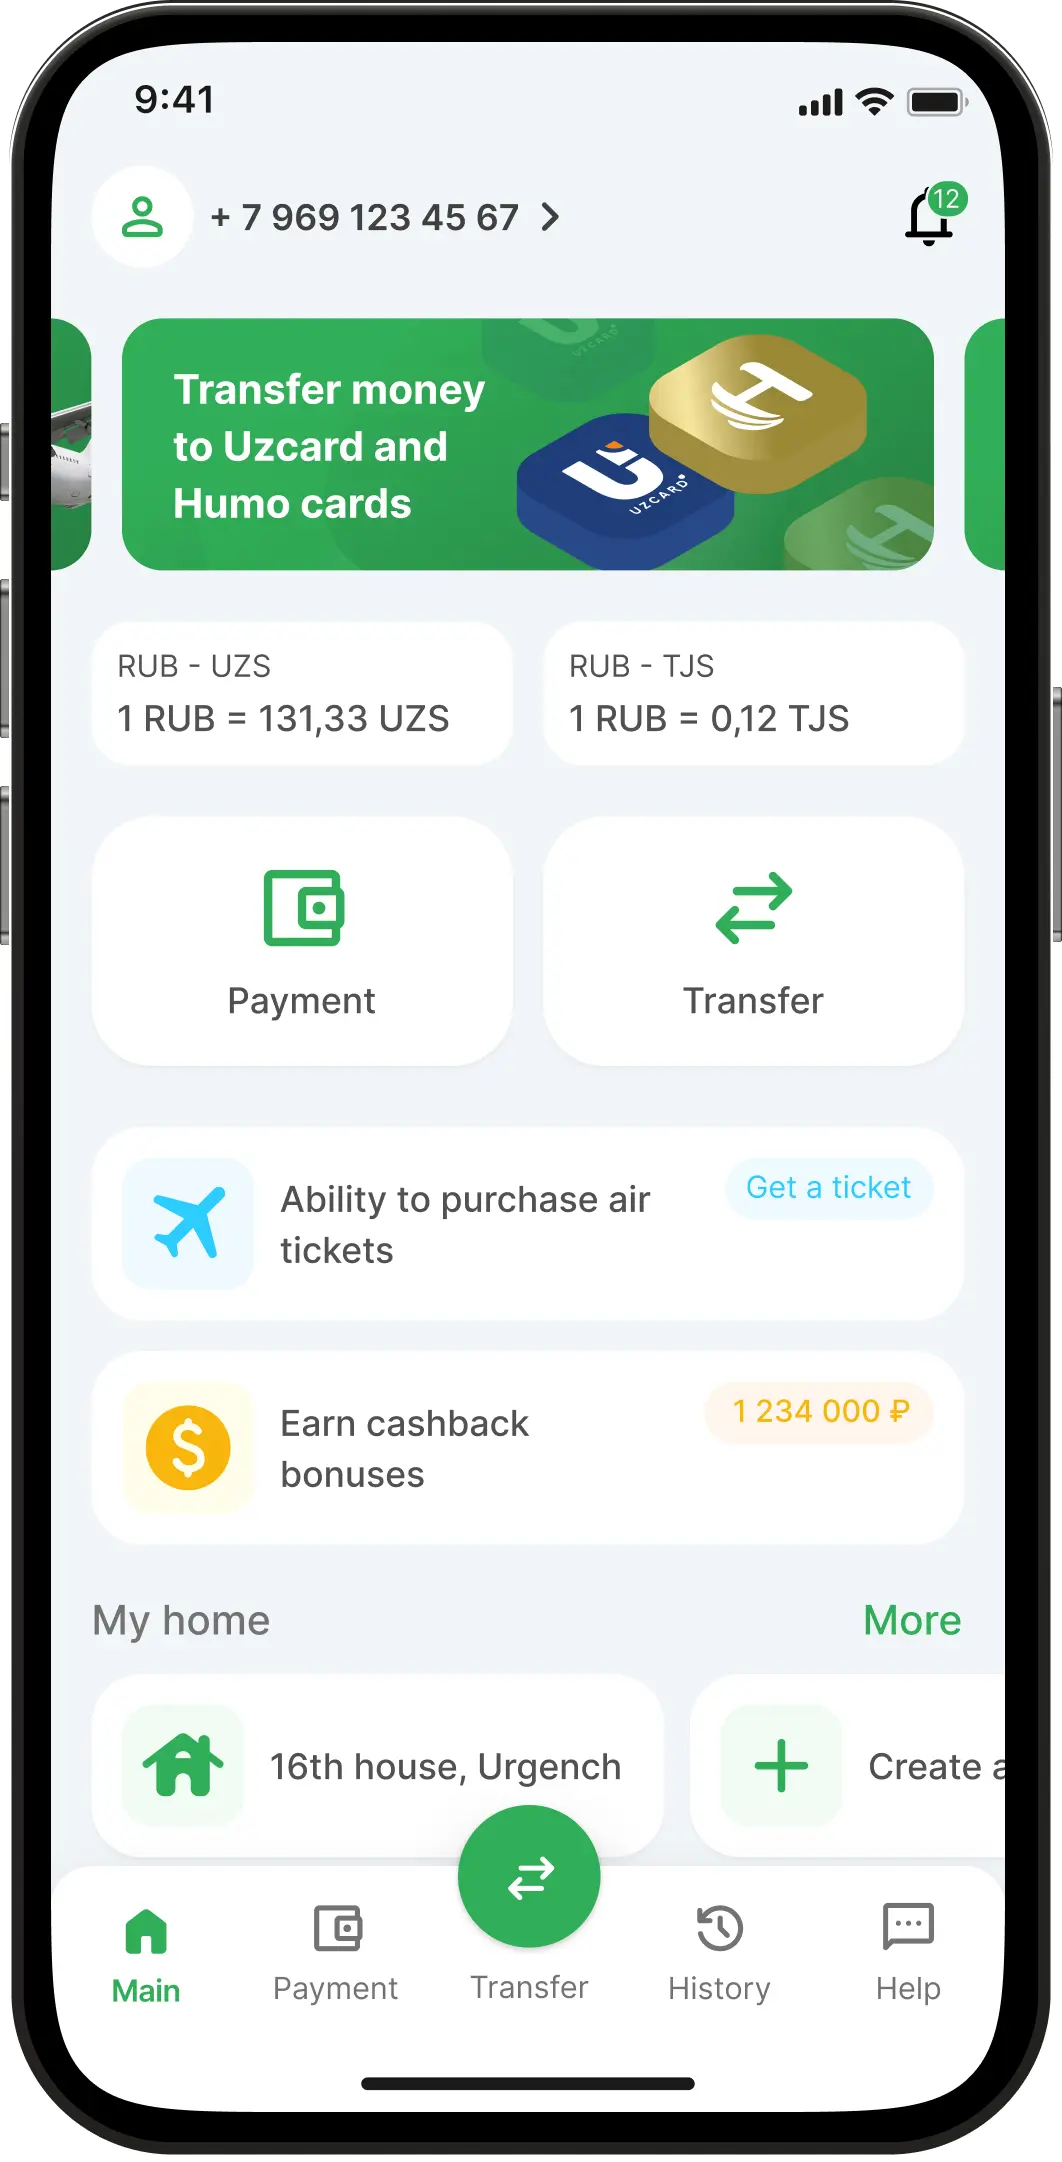 TezPay - An App for Convenient and Fast Money Transfers